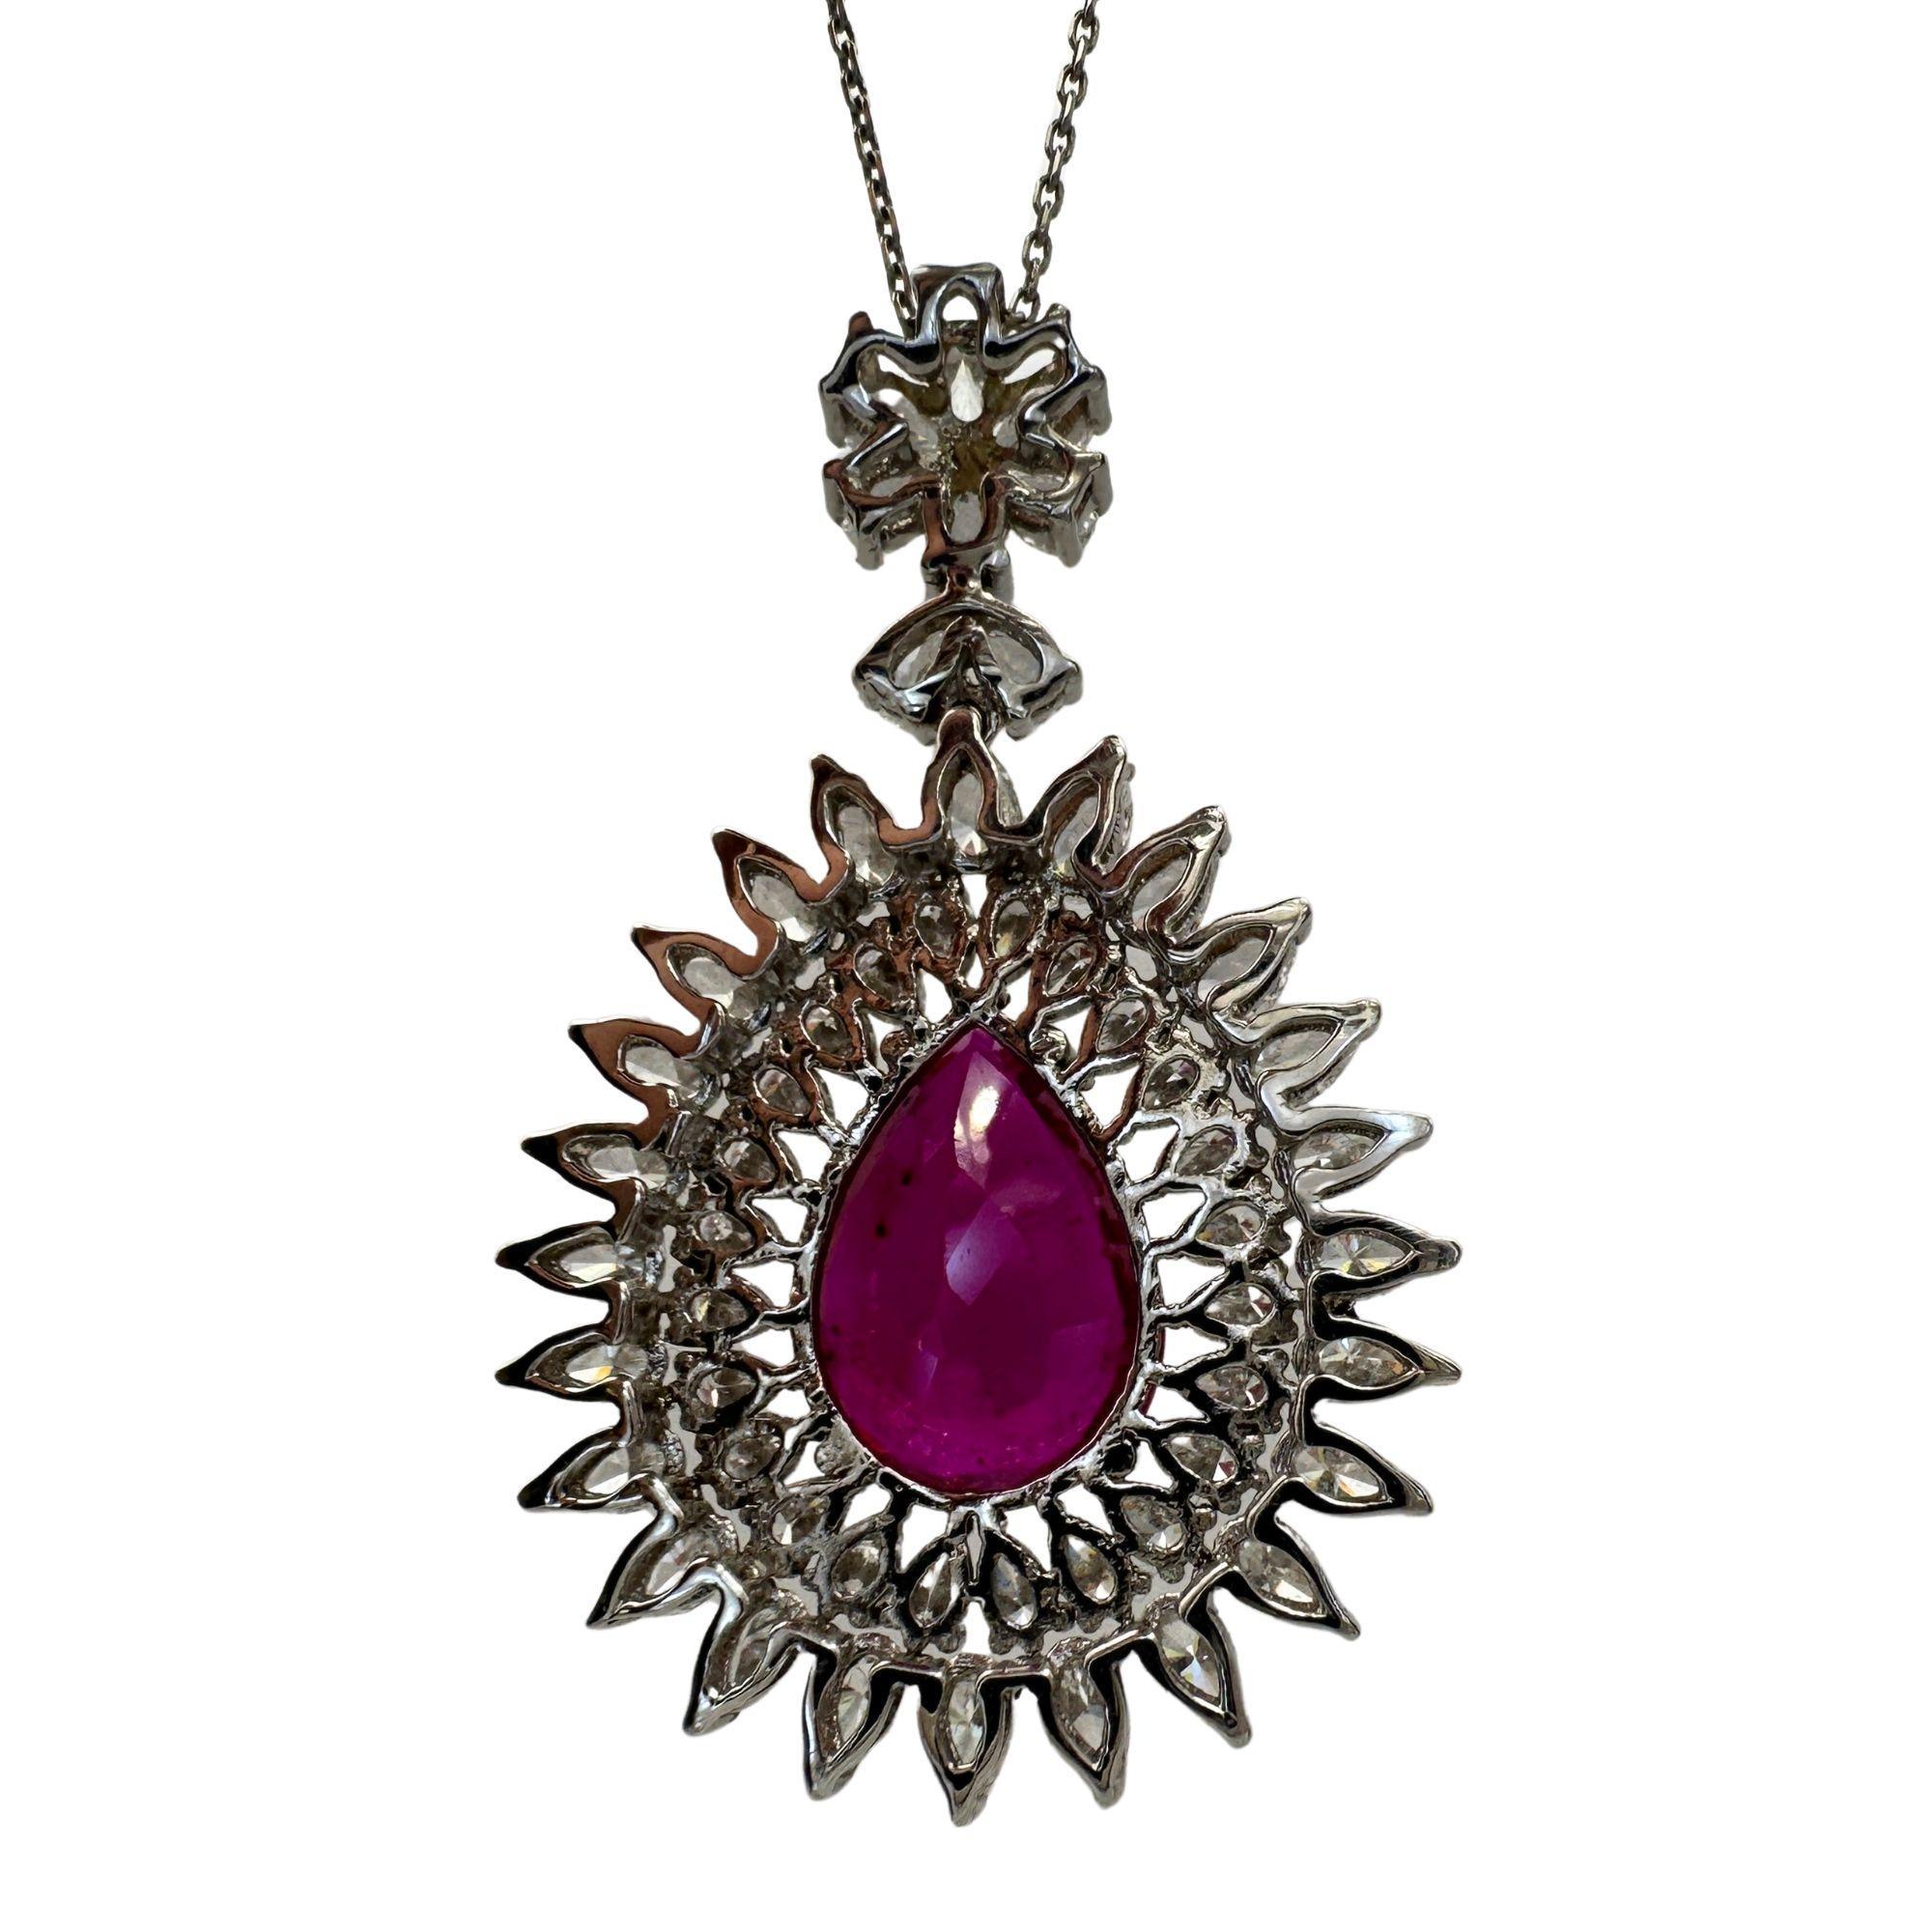 Elevate any outfit with our stunning 18k African Ruby and Diamond Pendant Necklace. Crafted in 18k white gold, this necklace features a 17.5 inch chain and a dazzling 1.75 inch pendant adorned with princess cut diamonds (4.55 carats) and a vibrant